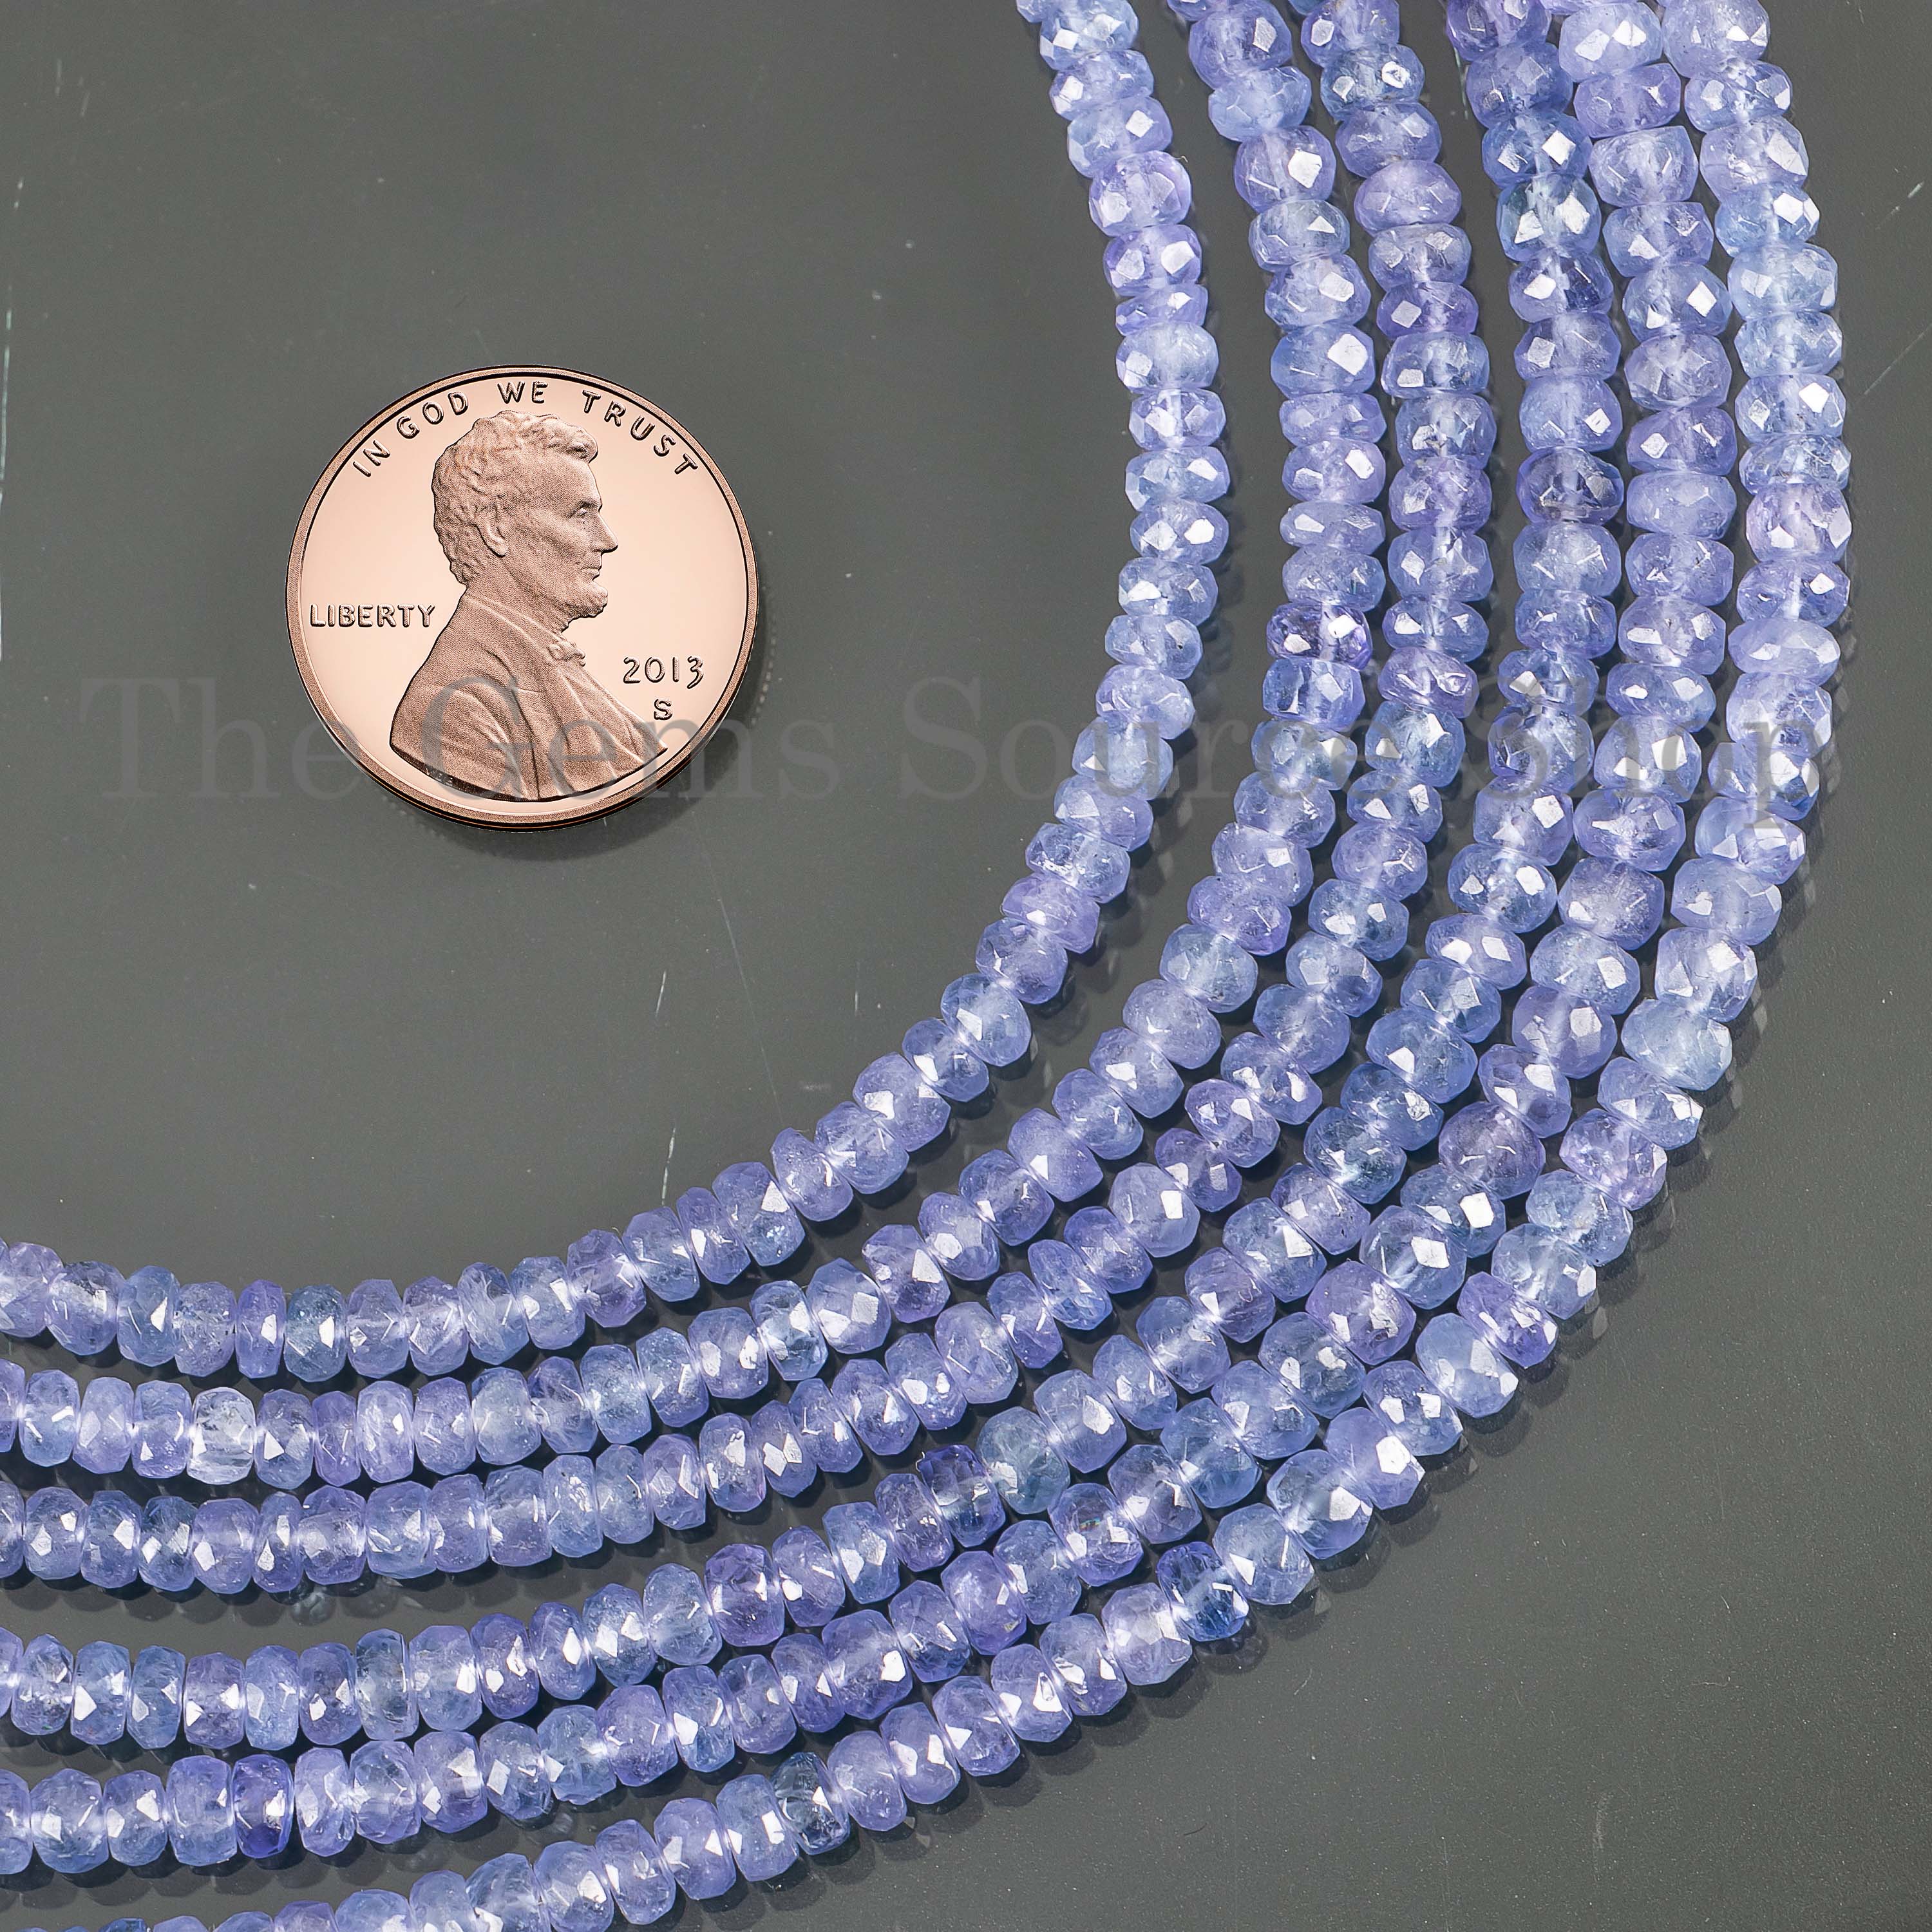 Natural Tanzanite Faceted Rondelle Beads, Tanzanite Briolette Beads, Loose Tanzanite Beads